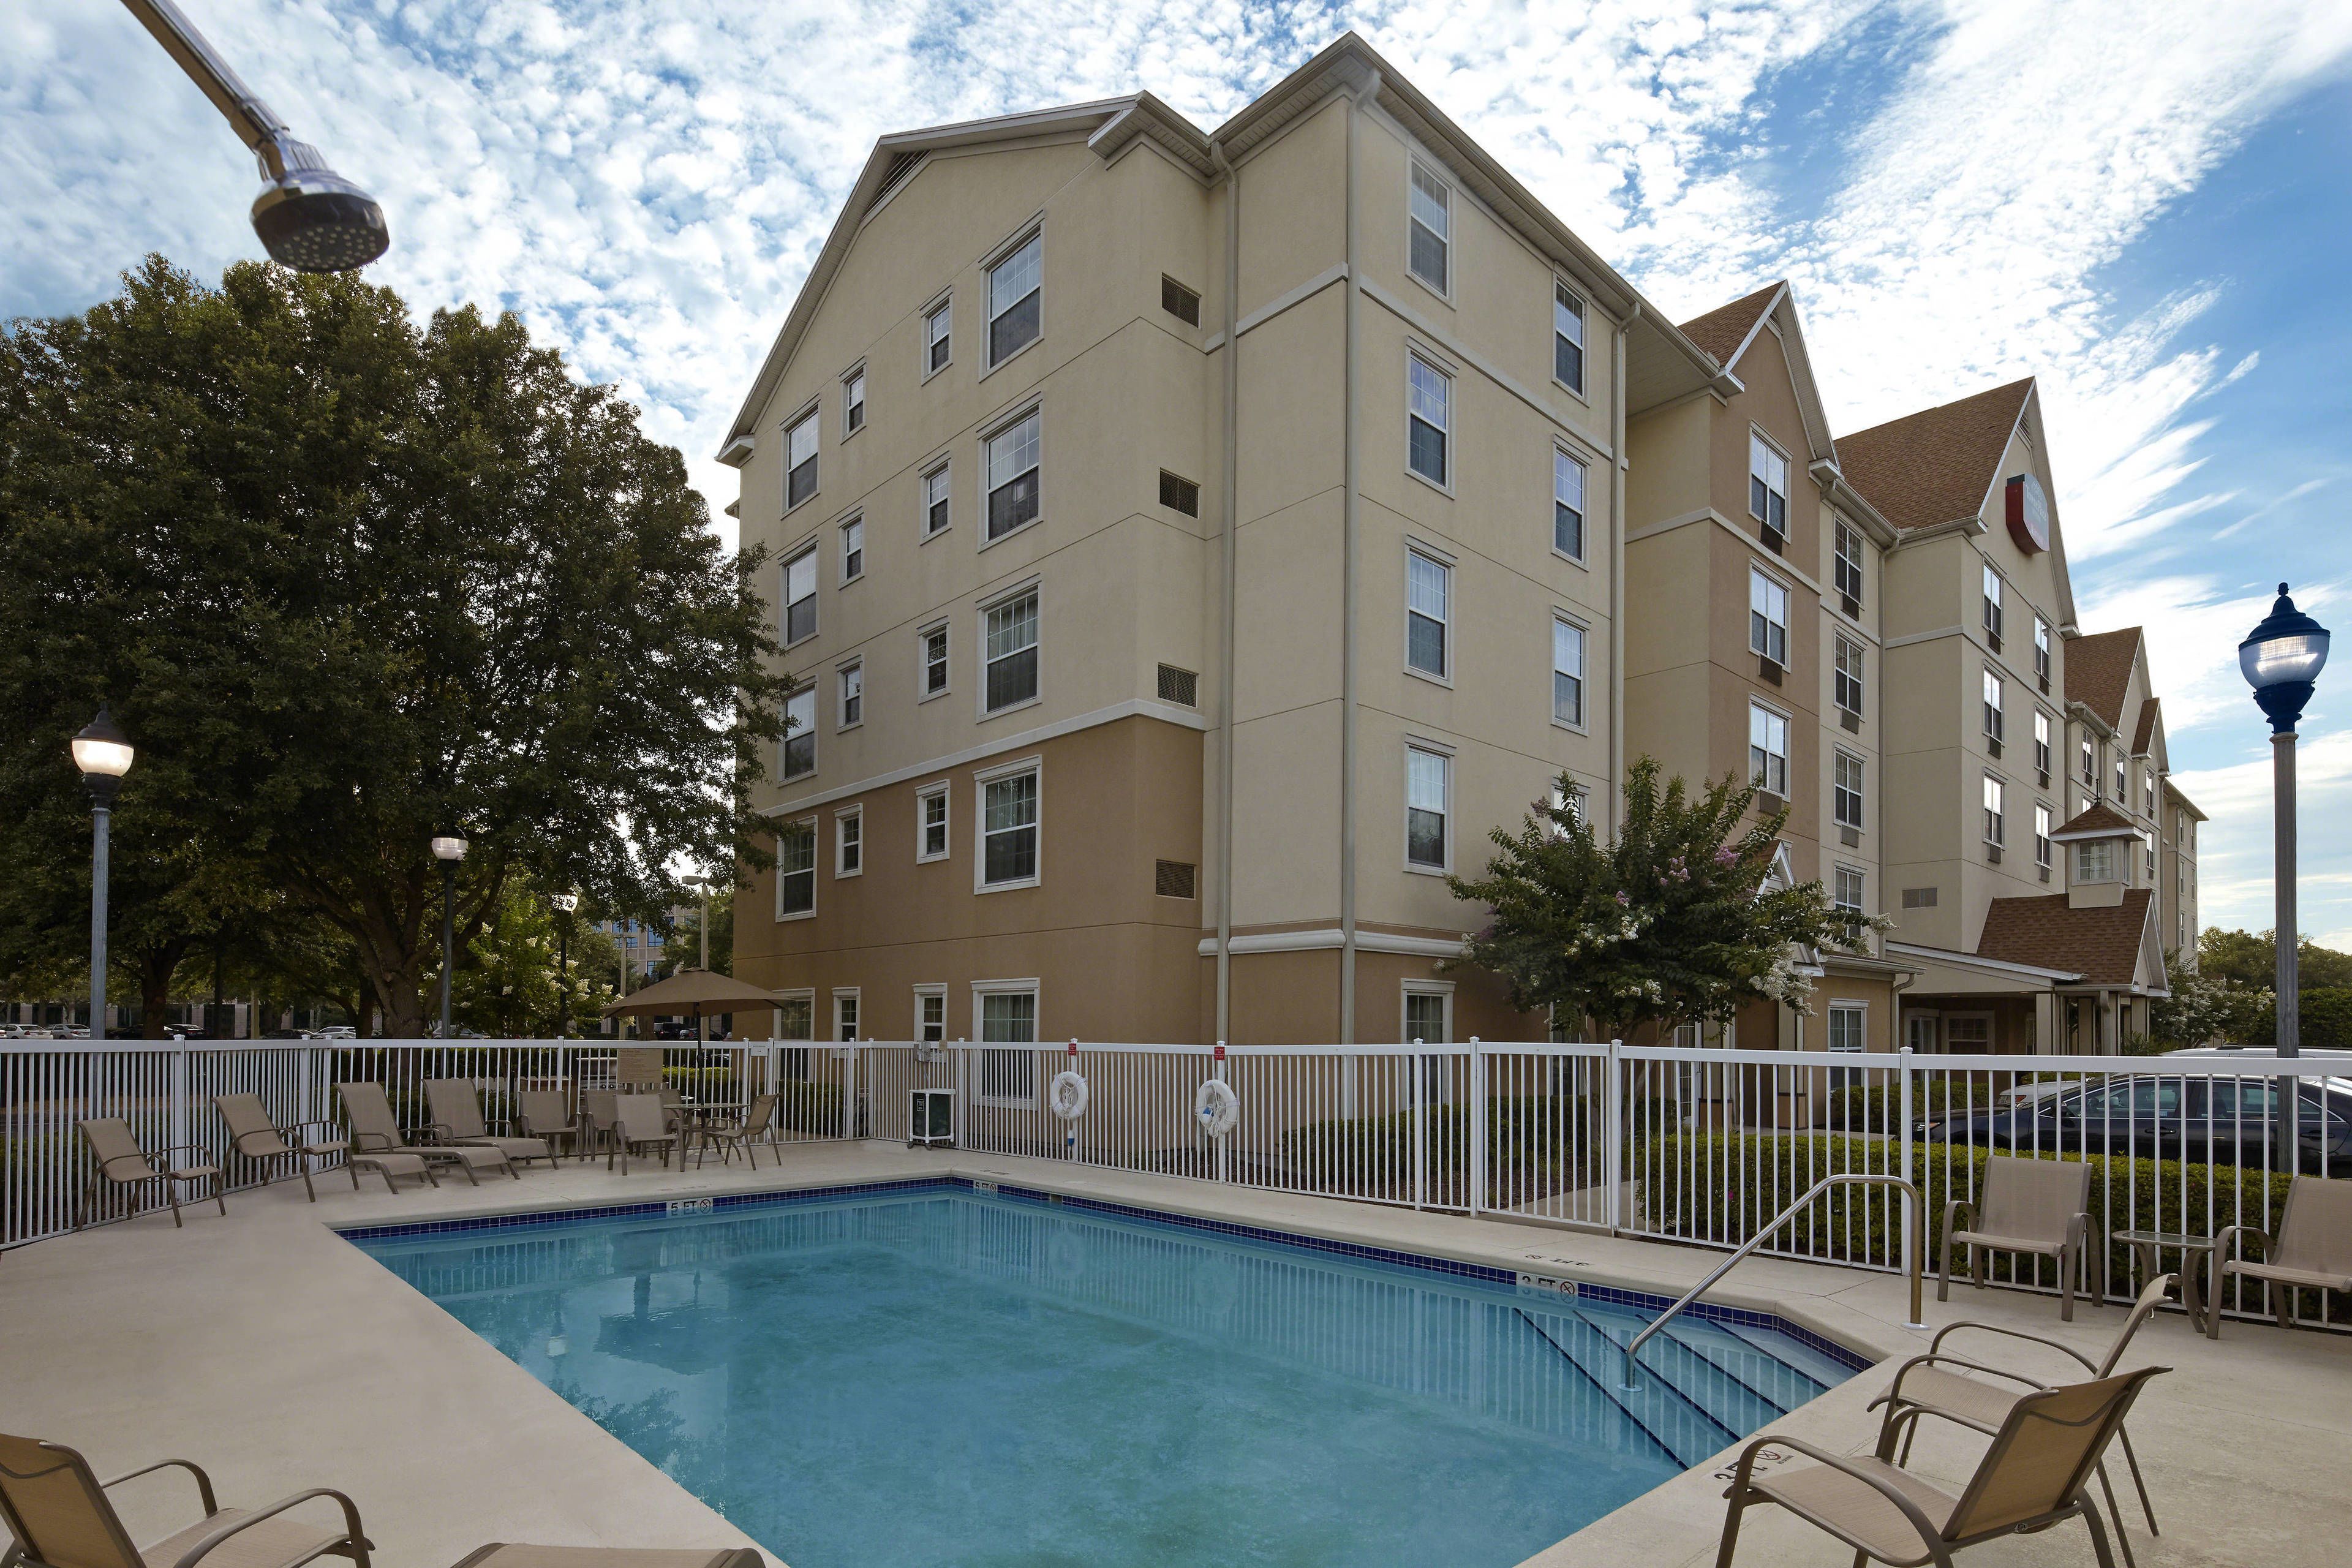 TownePlace Suites Orlando East/UCF Area